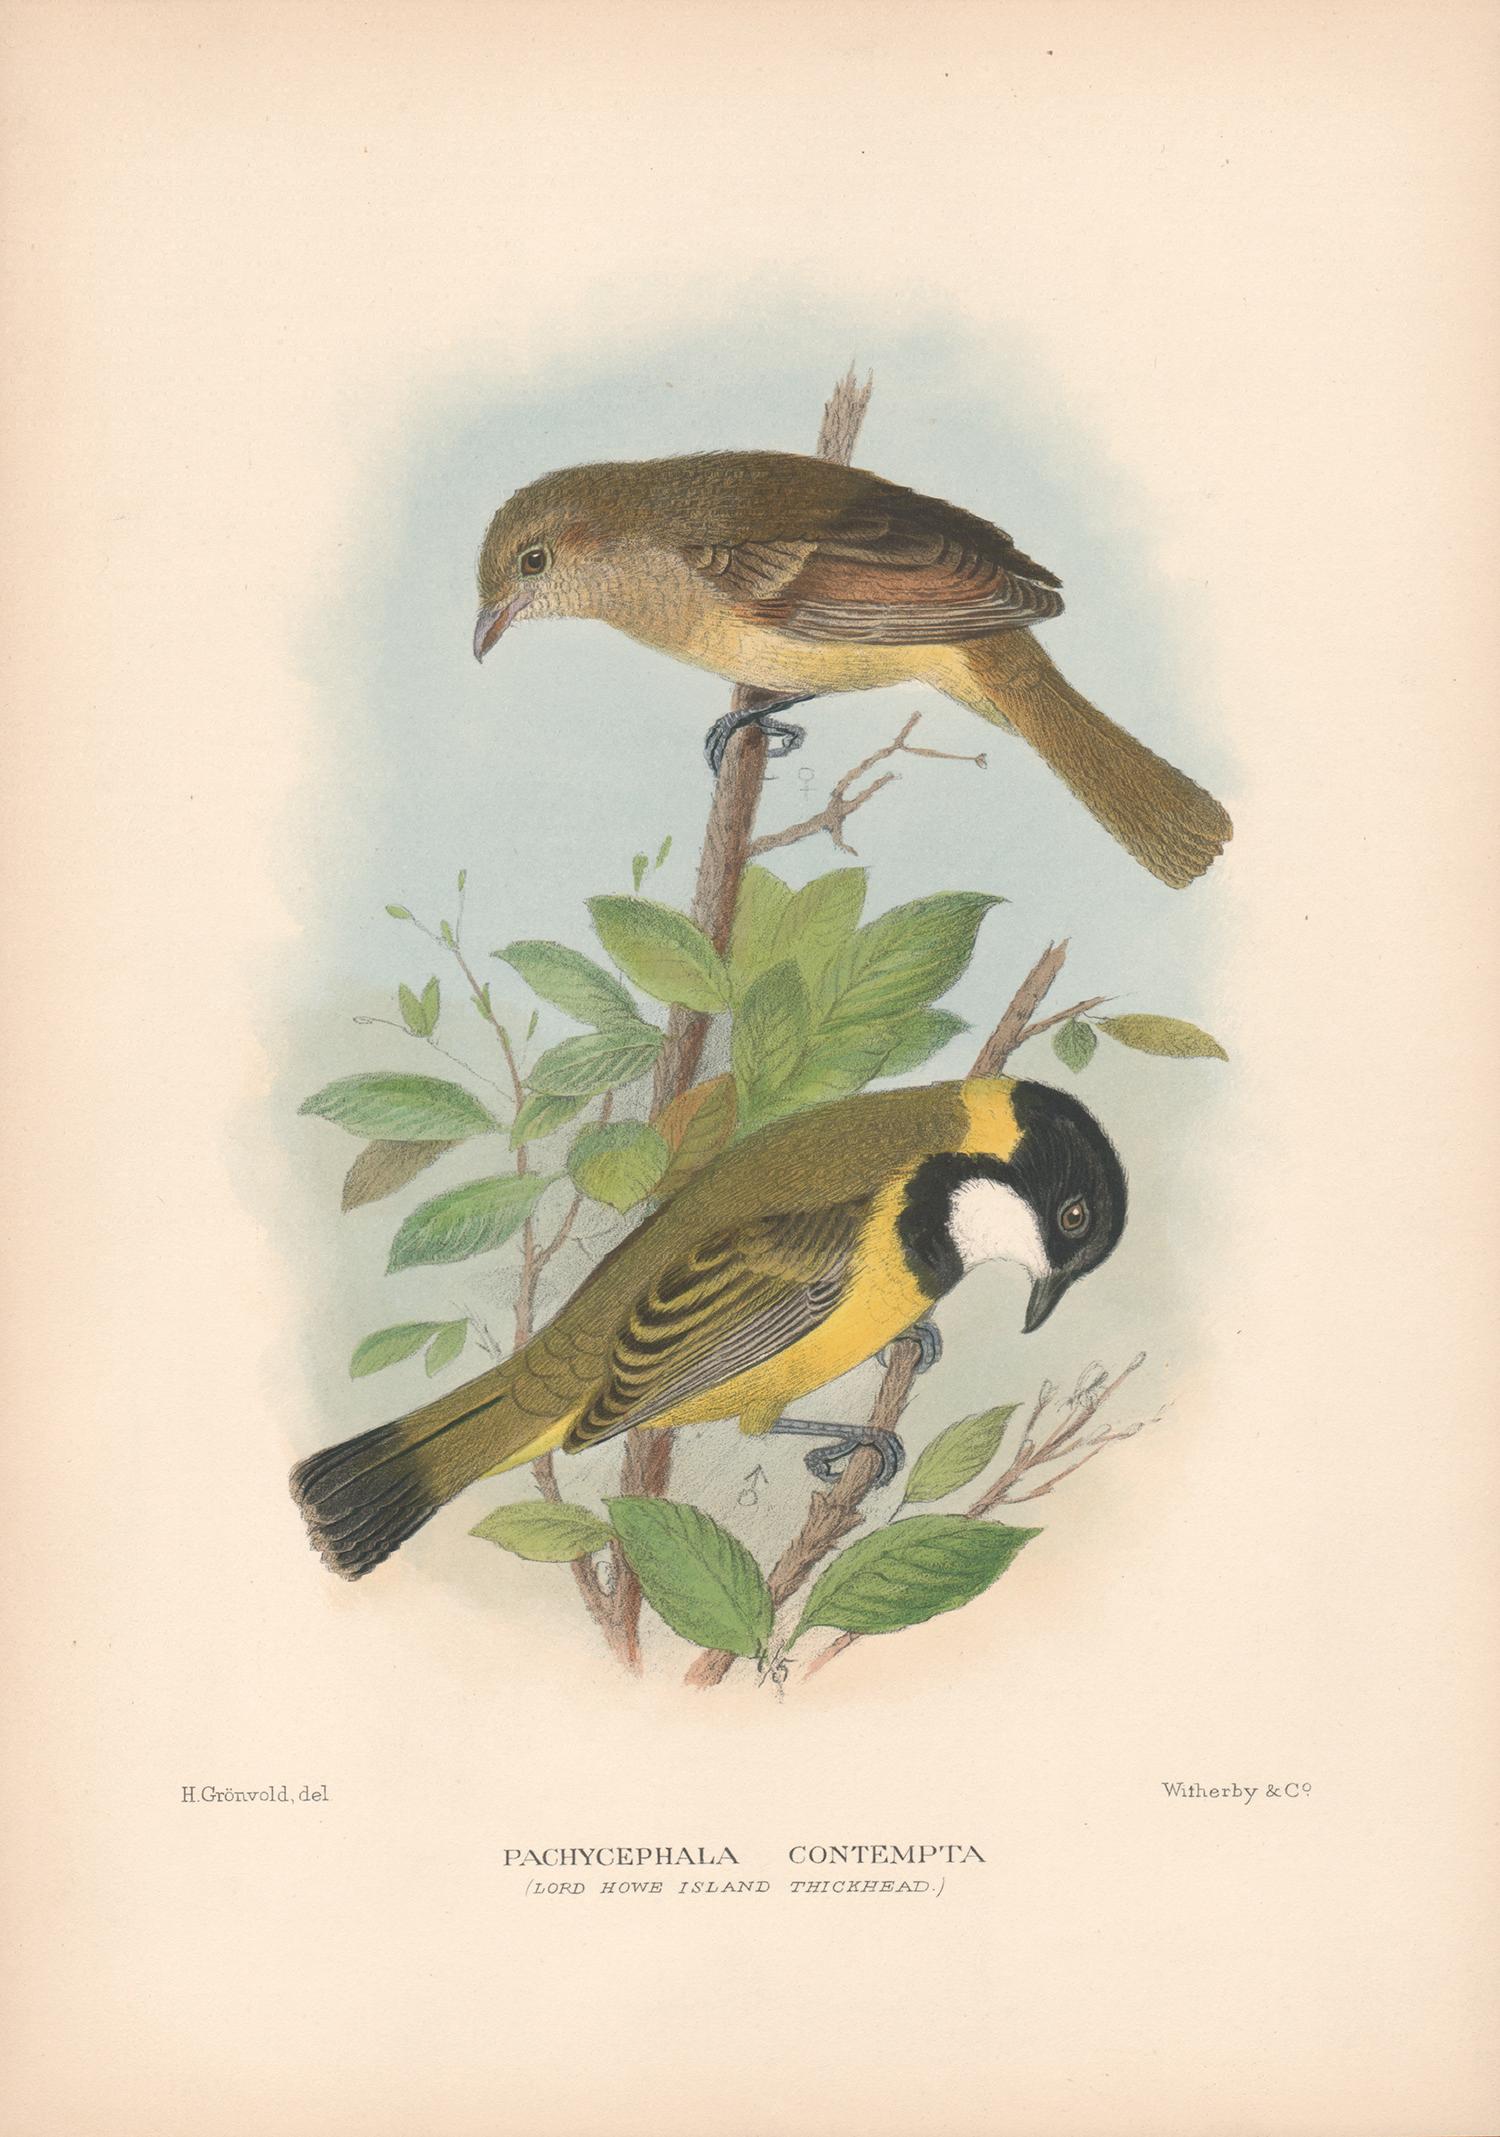 Lord Howe Island Thickhead, Bird lithograph with hand-colouring, 1928